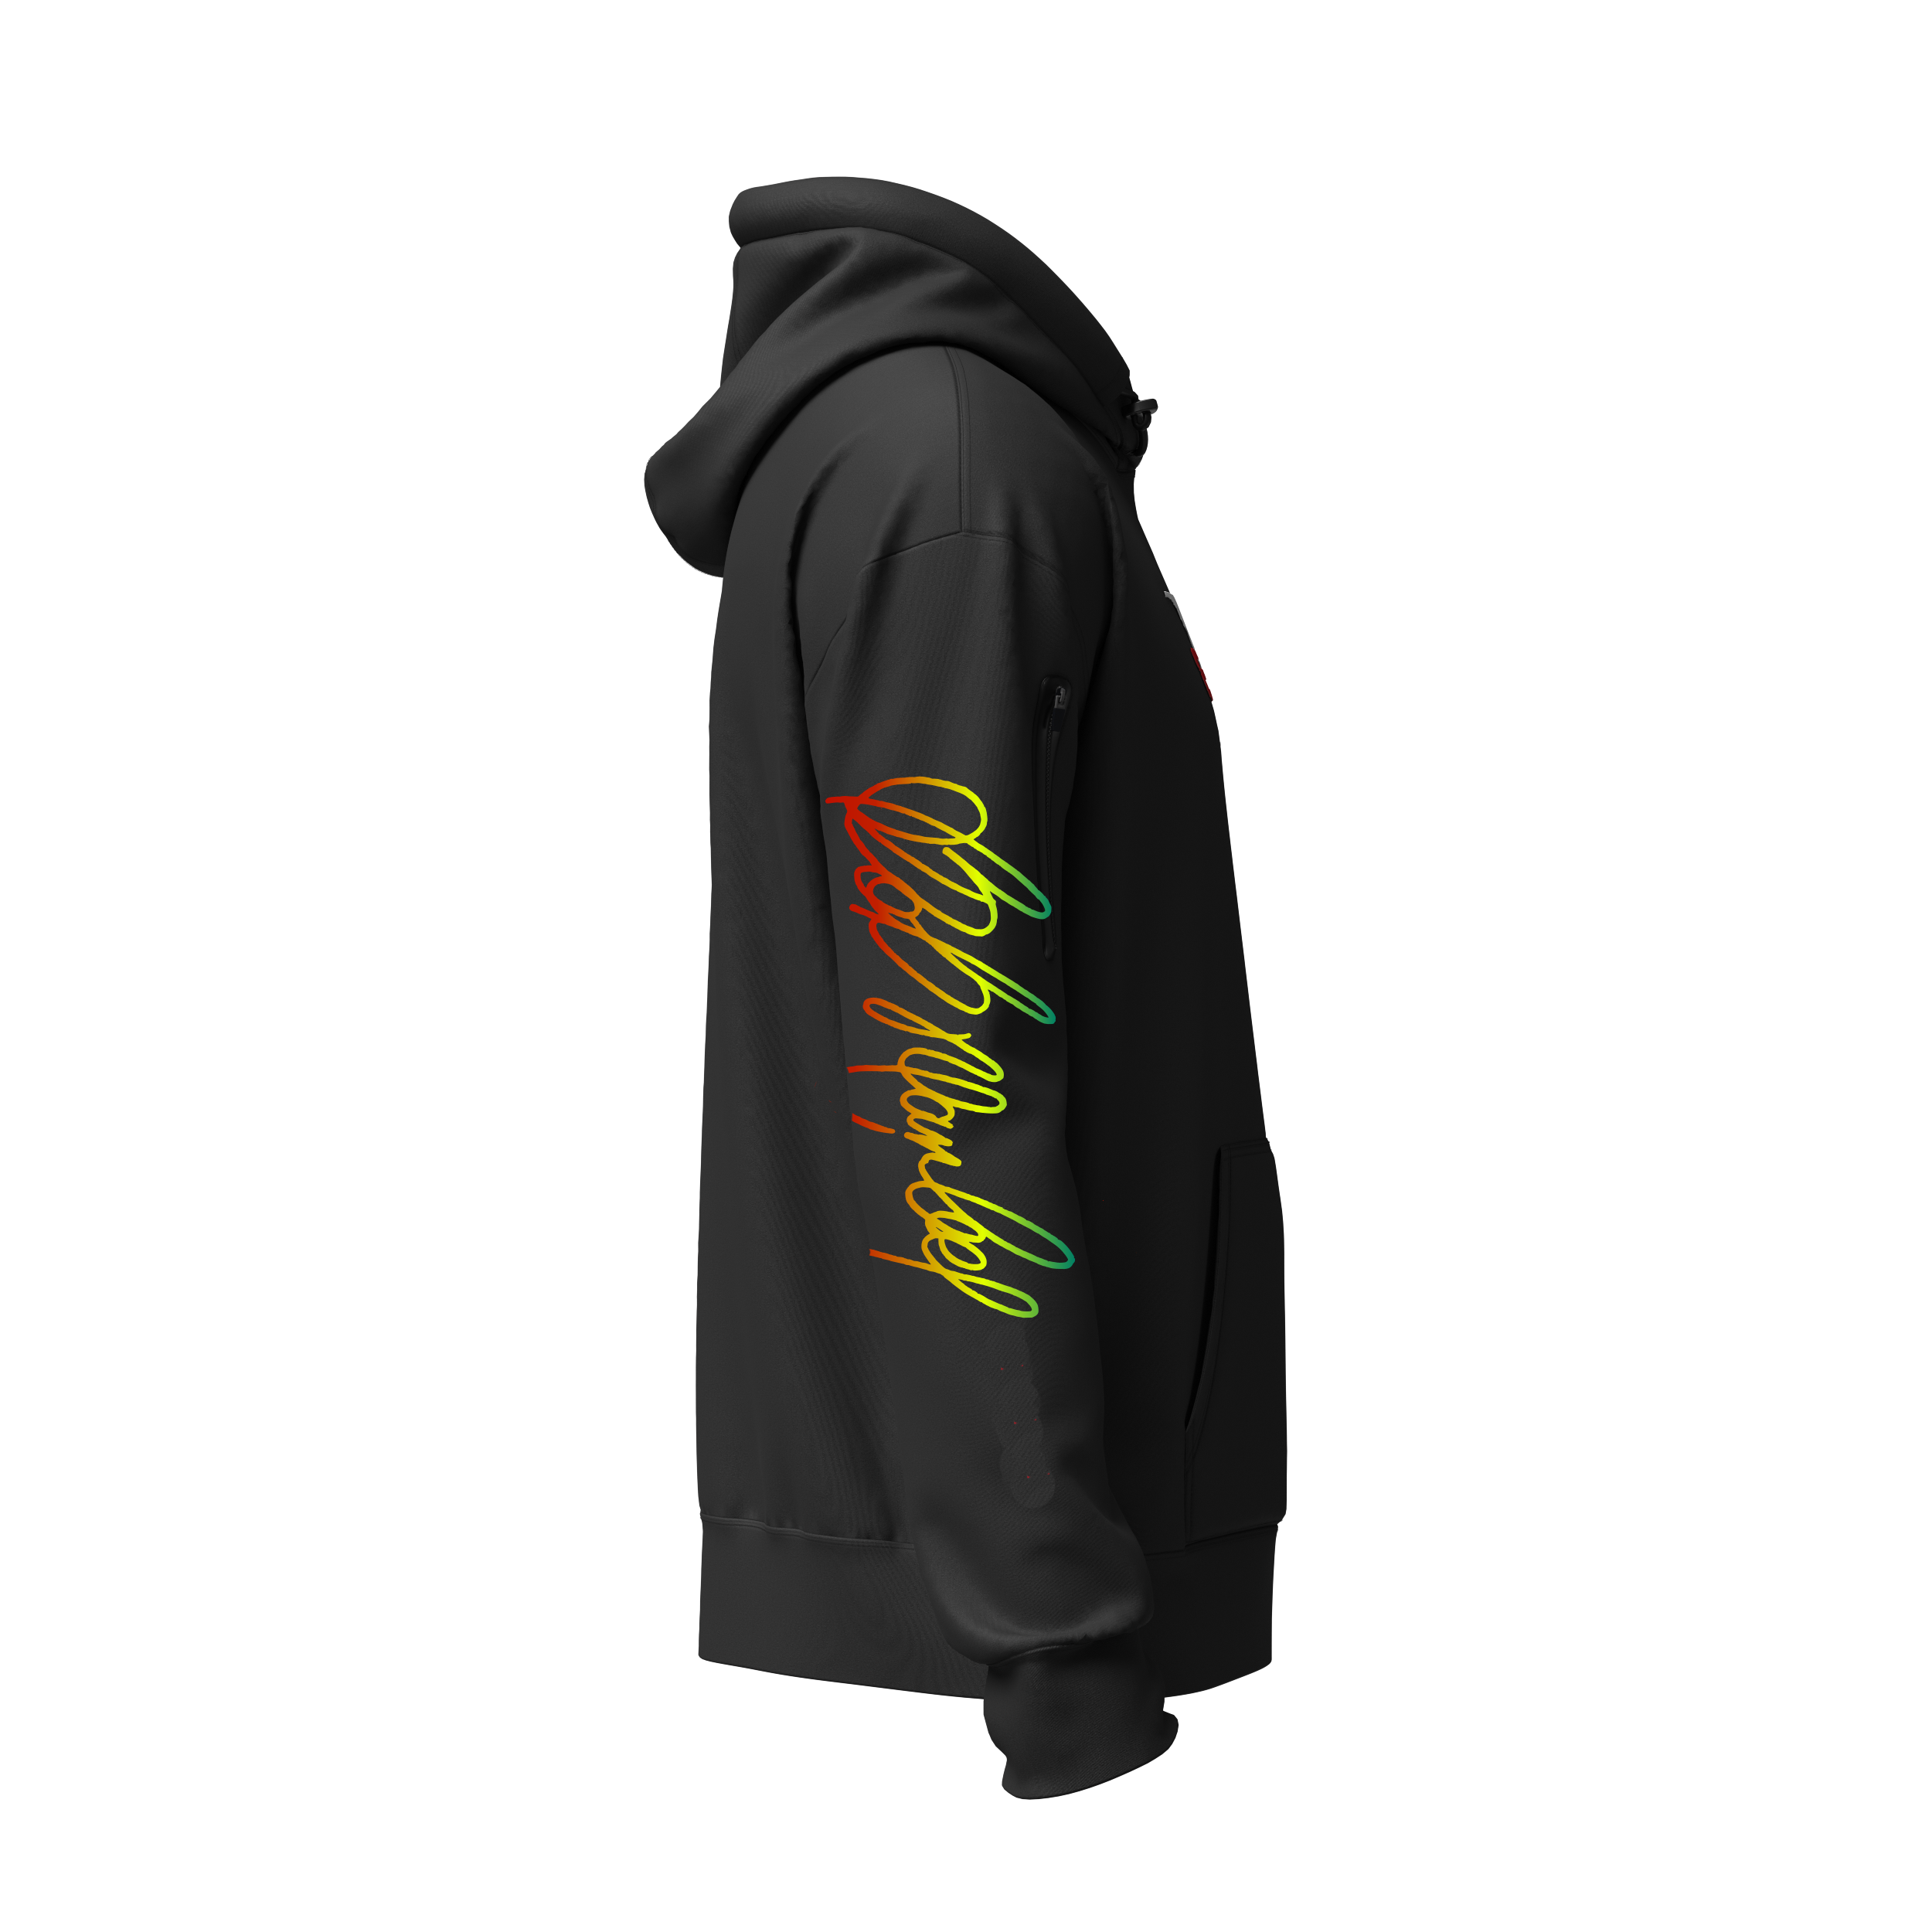 Bob Marley x Actively Black Performance Tech Hoodie